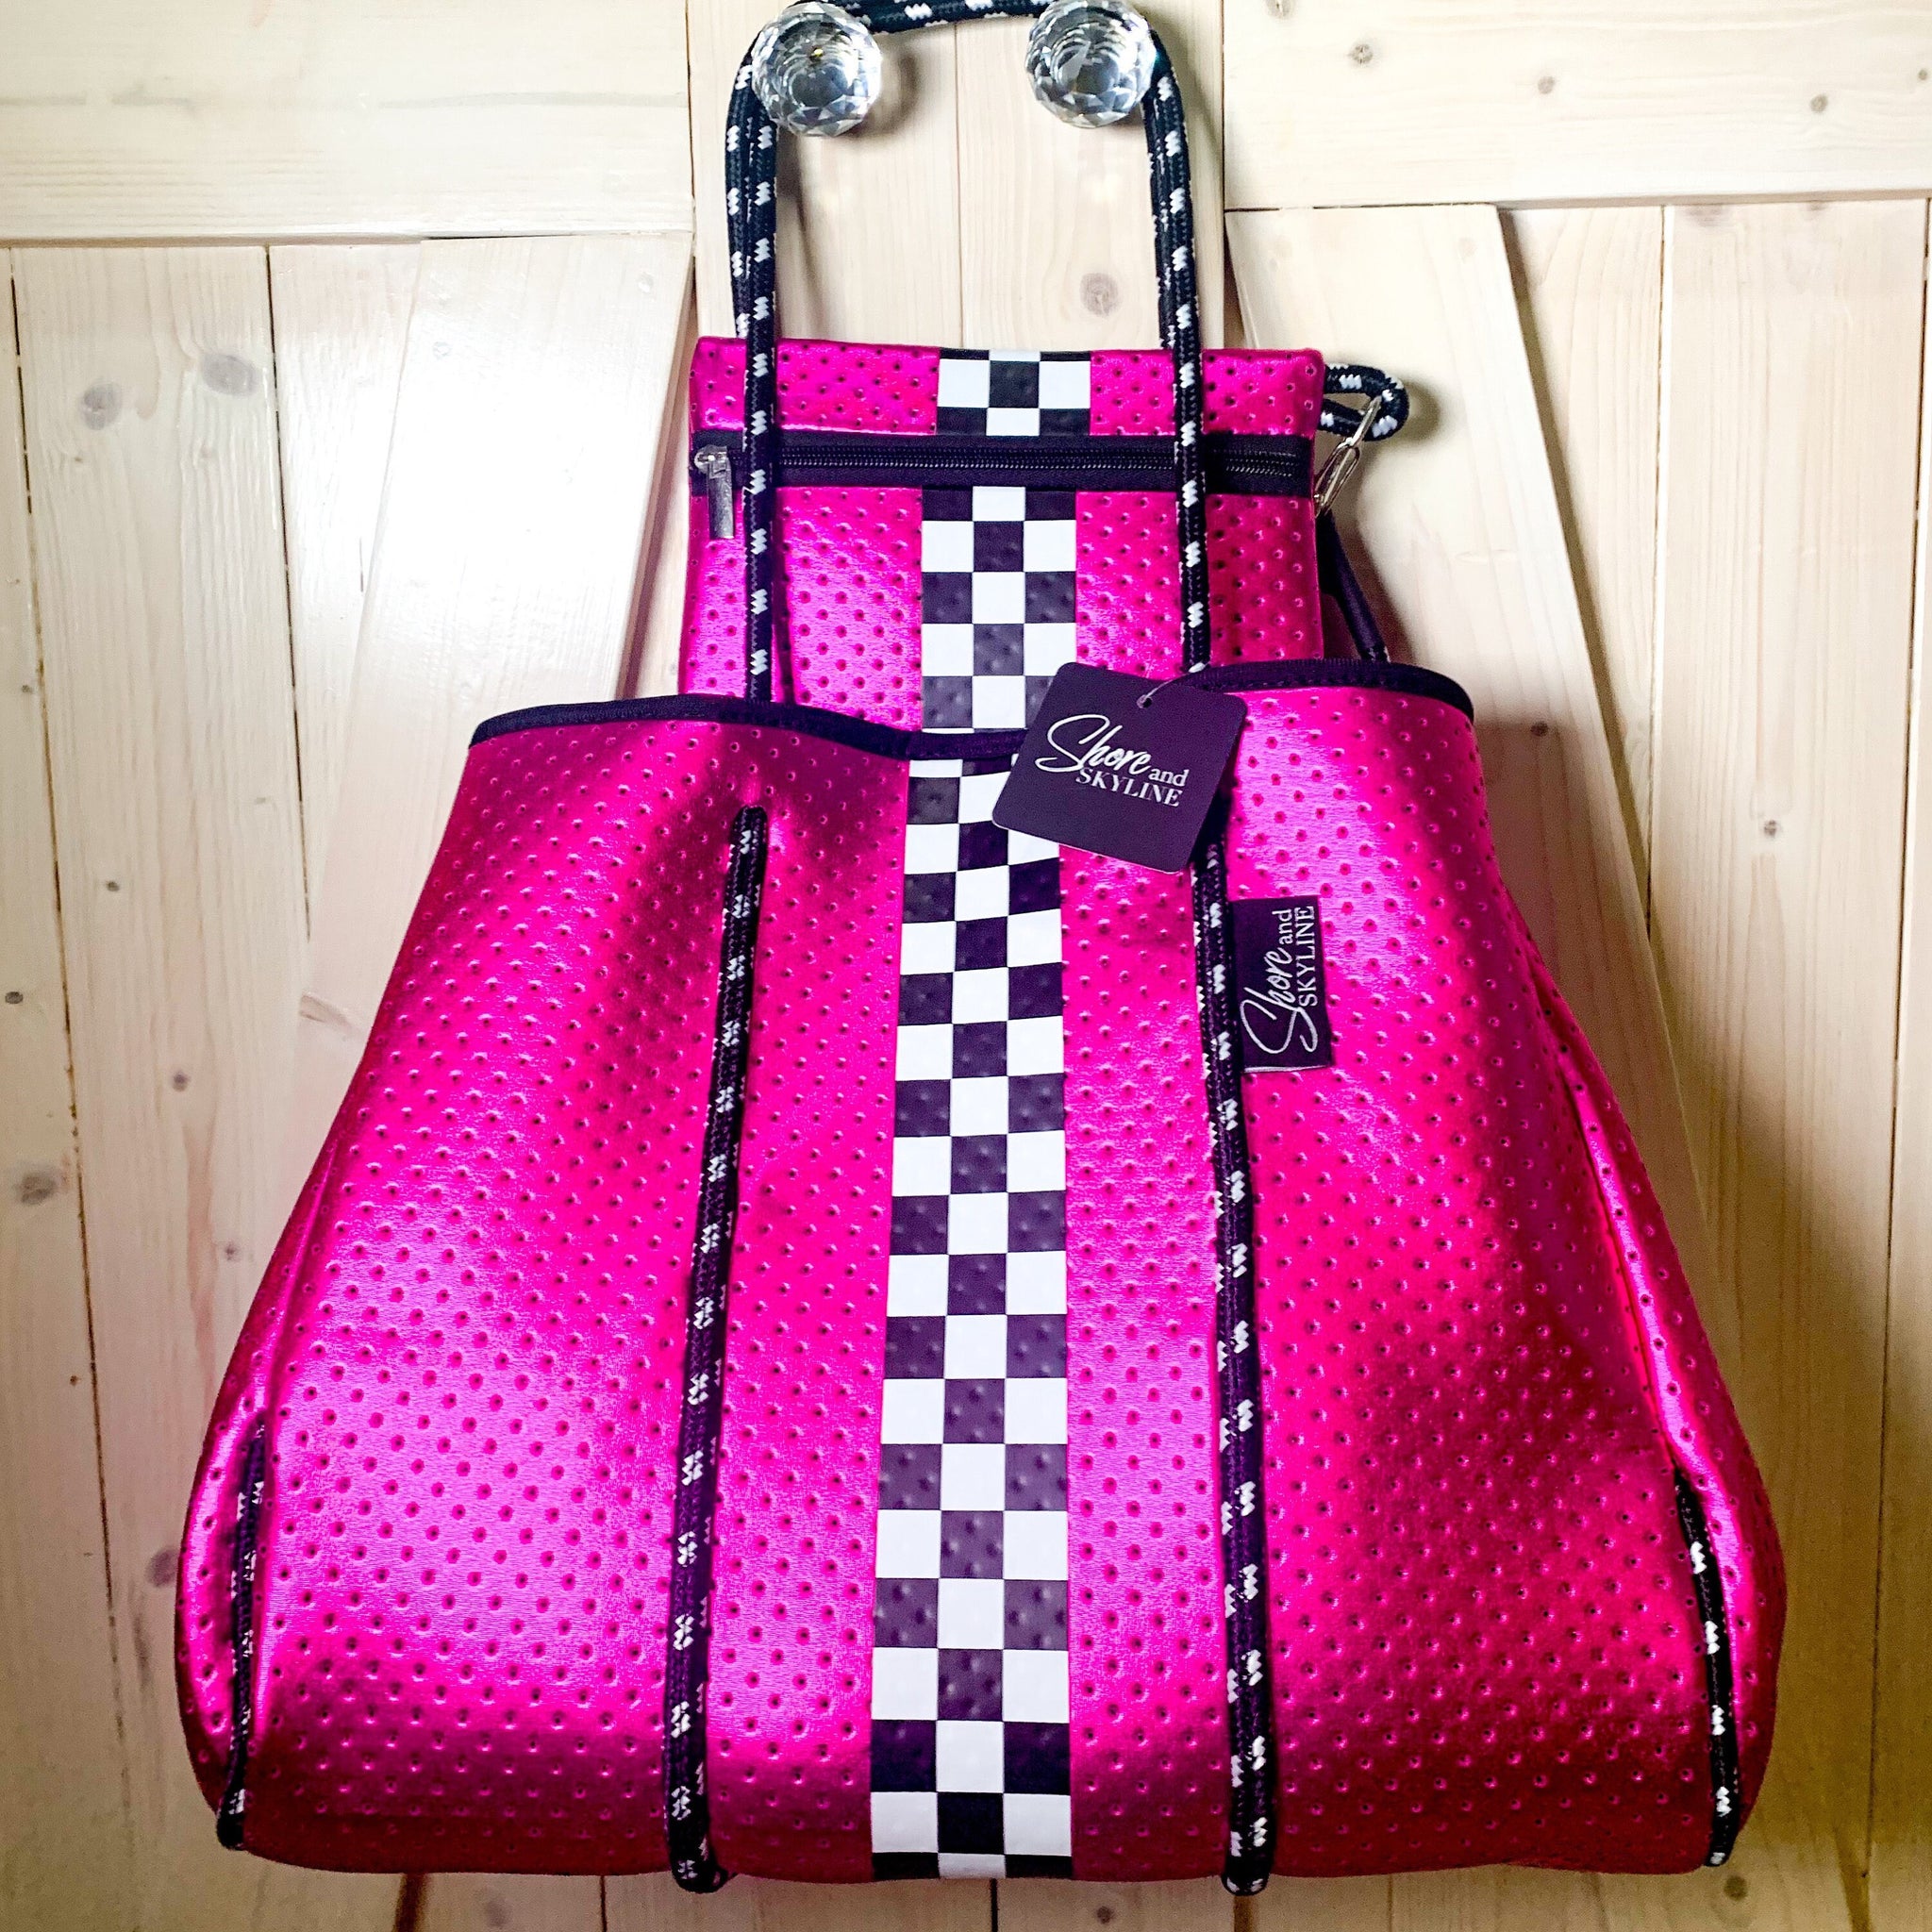 Buy Neoprene Tote Large Blue Camo With Hot Pink Racer Stripe